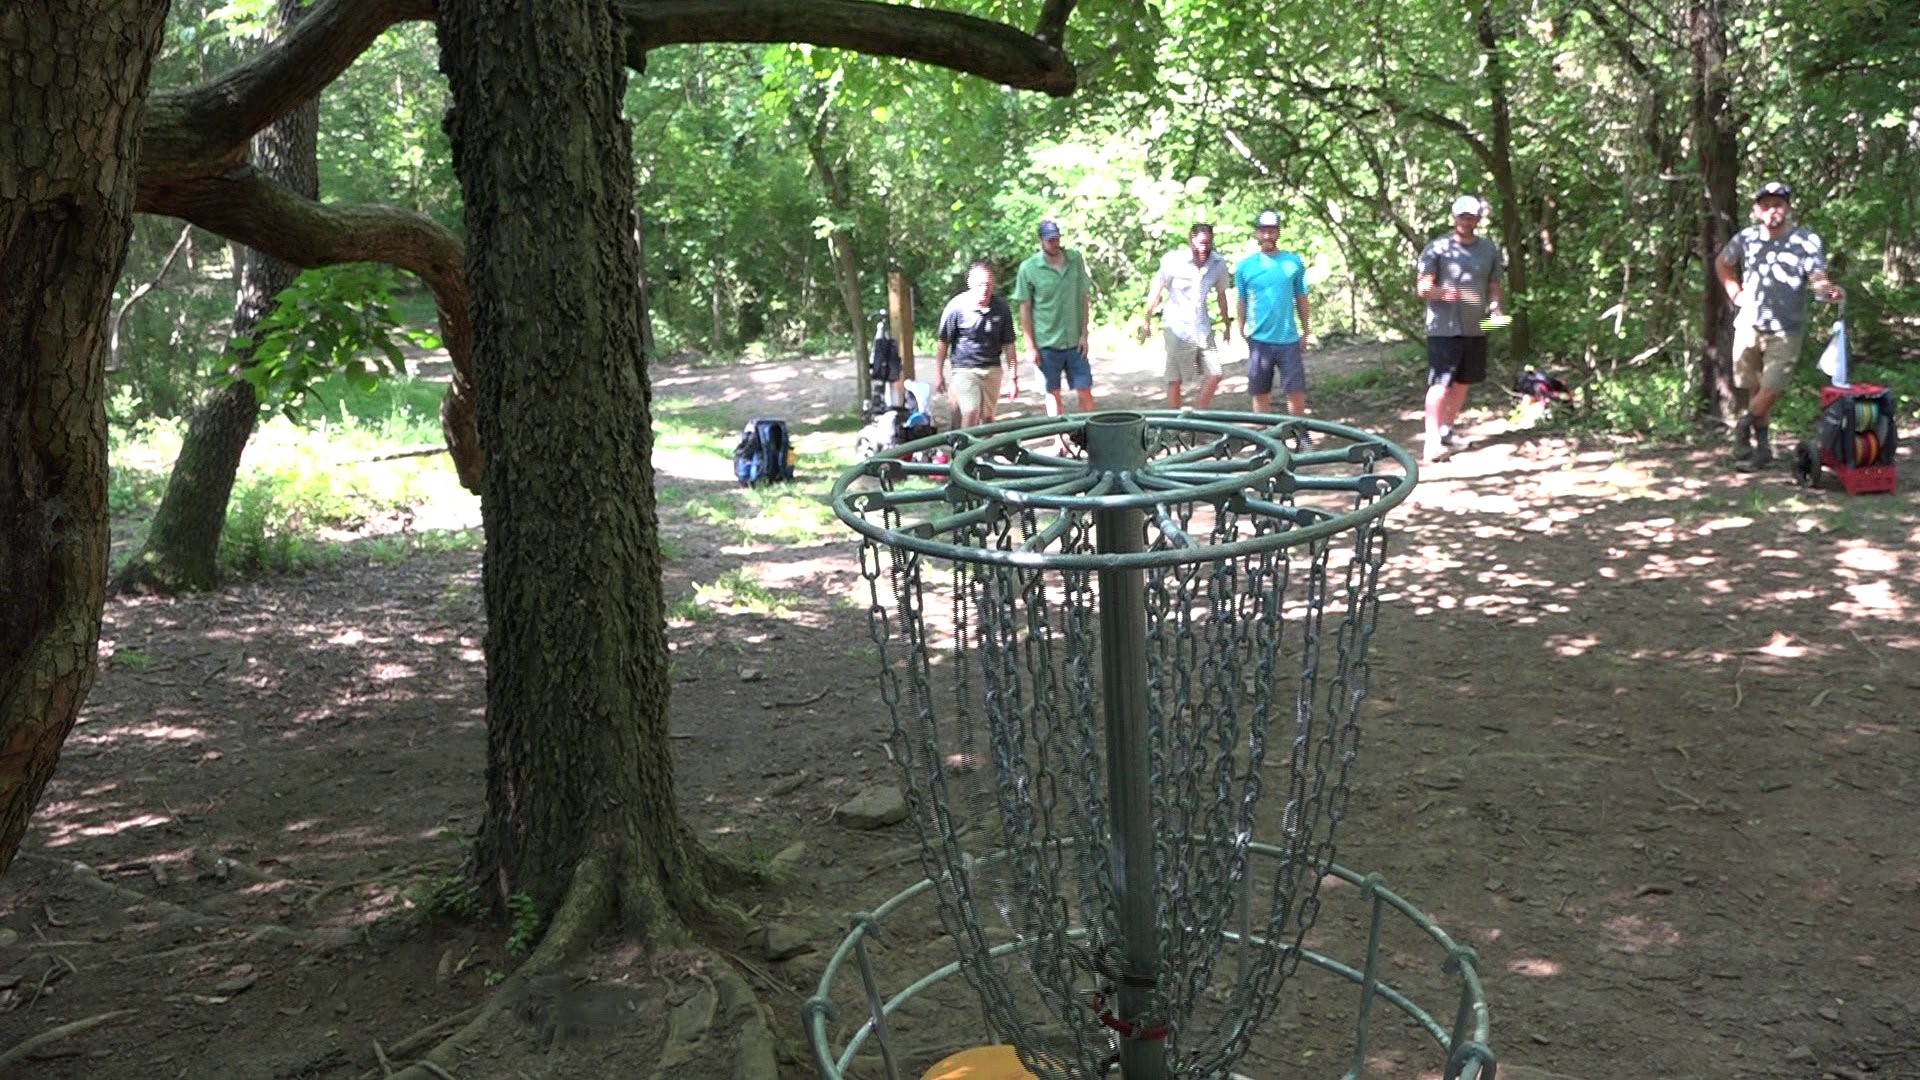 Northwest Arkansas is home to the NWA Open, where amateur and professional disc golfers alike compete in a three-day tournament.